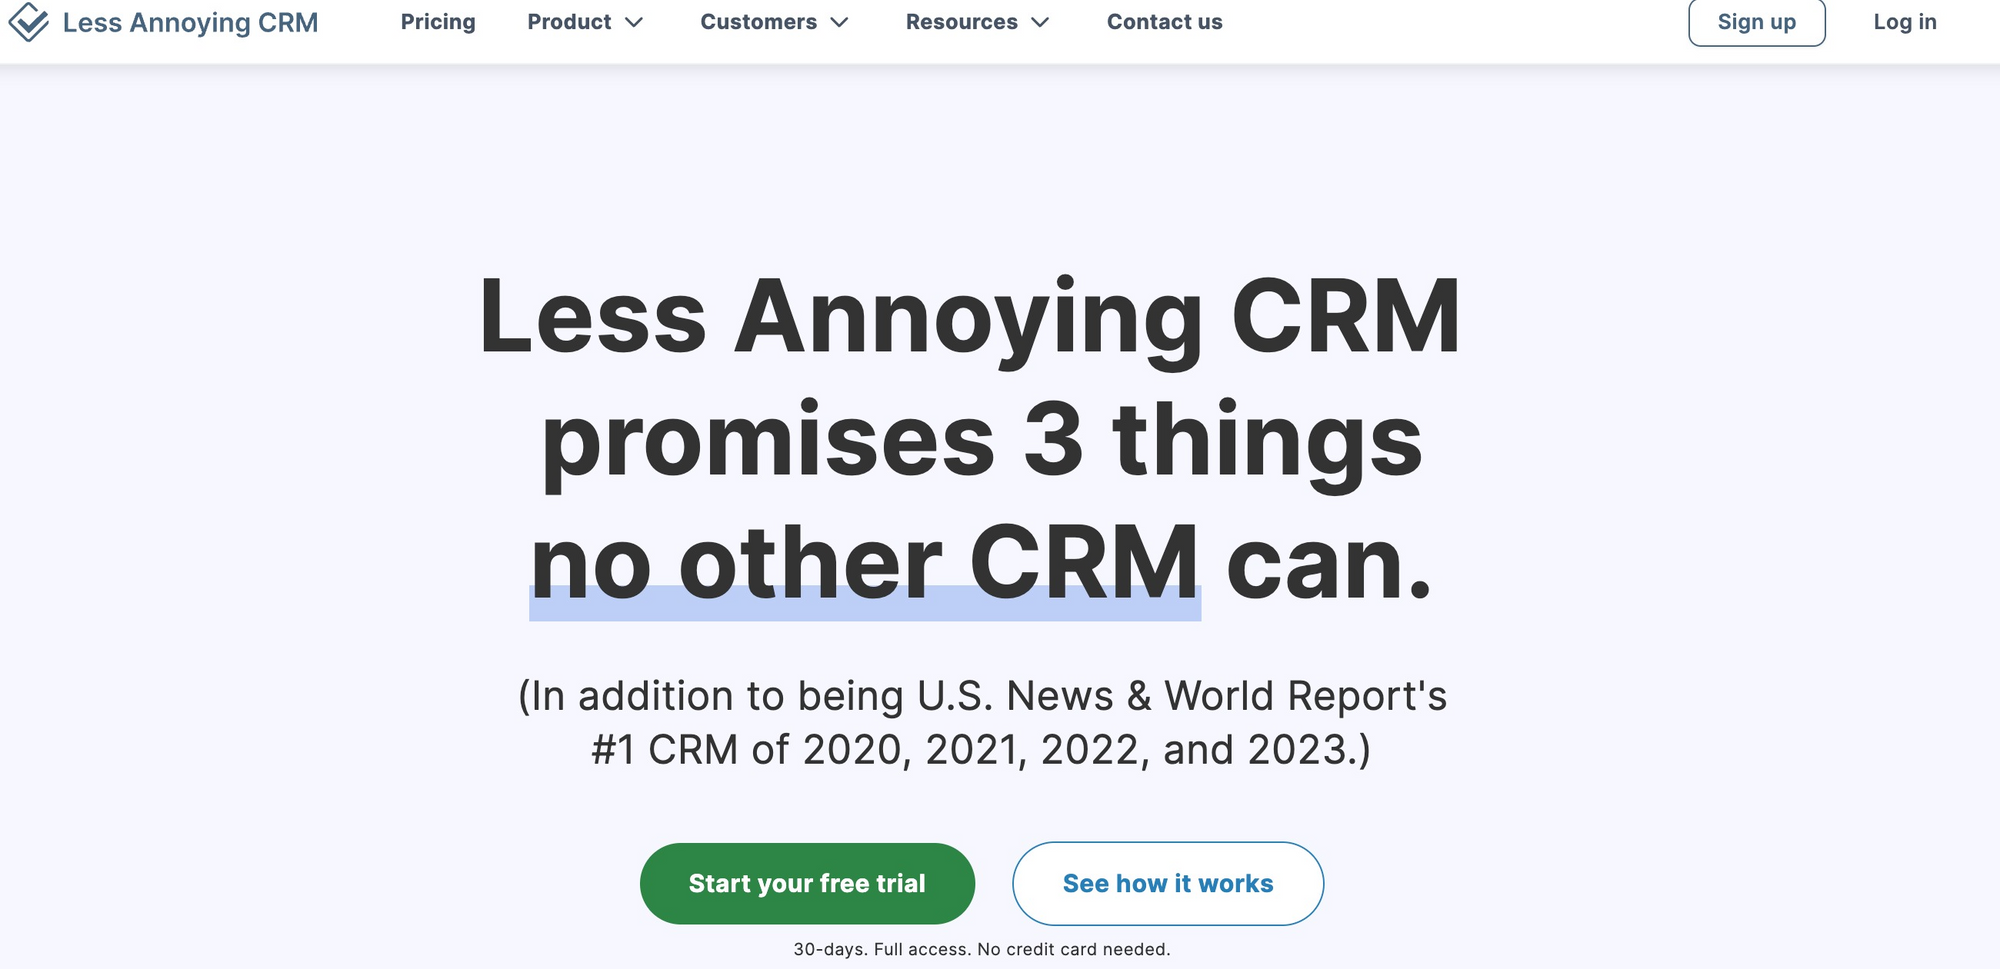 Less Annoying CRM, a small business CRM